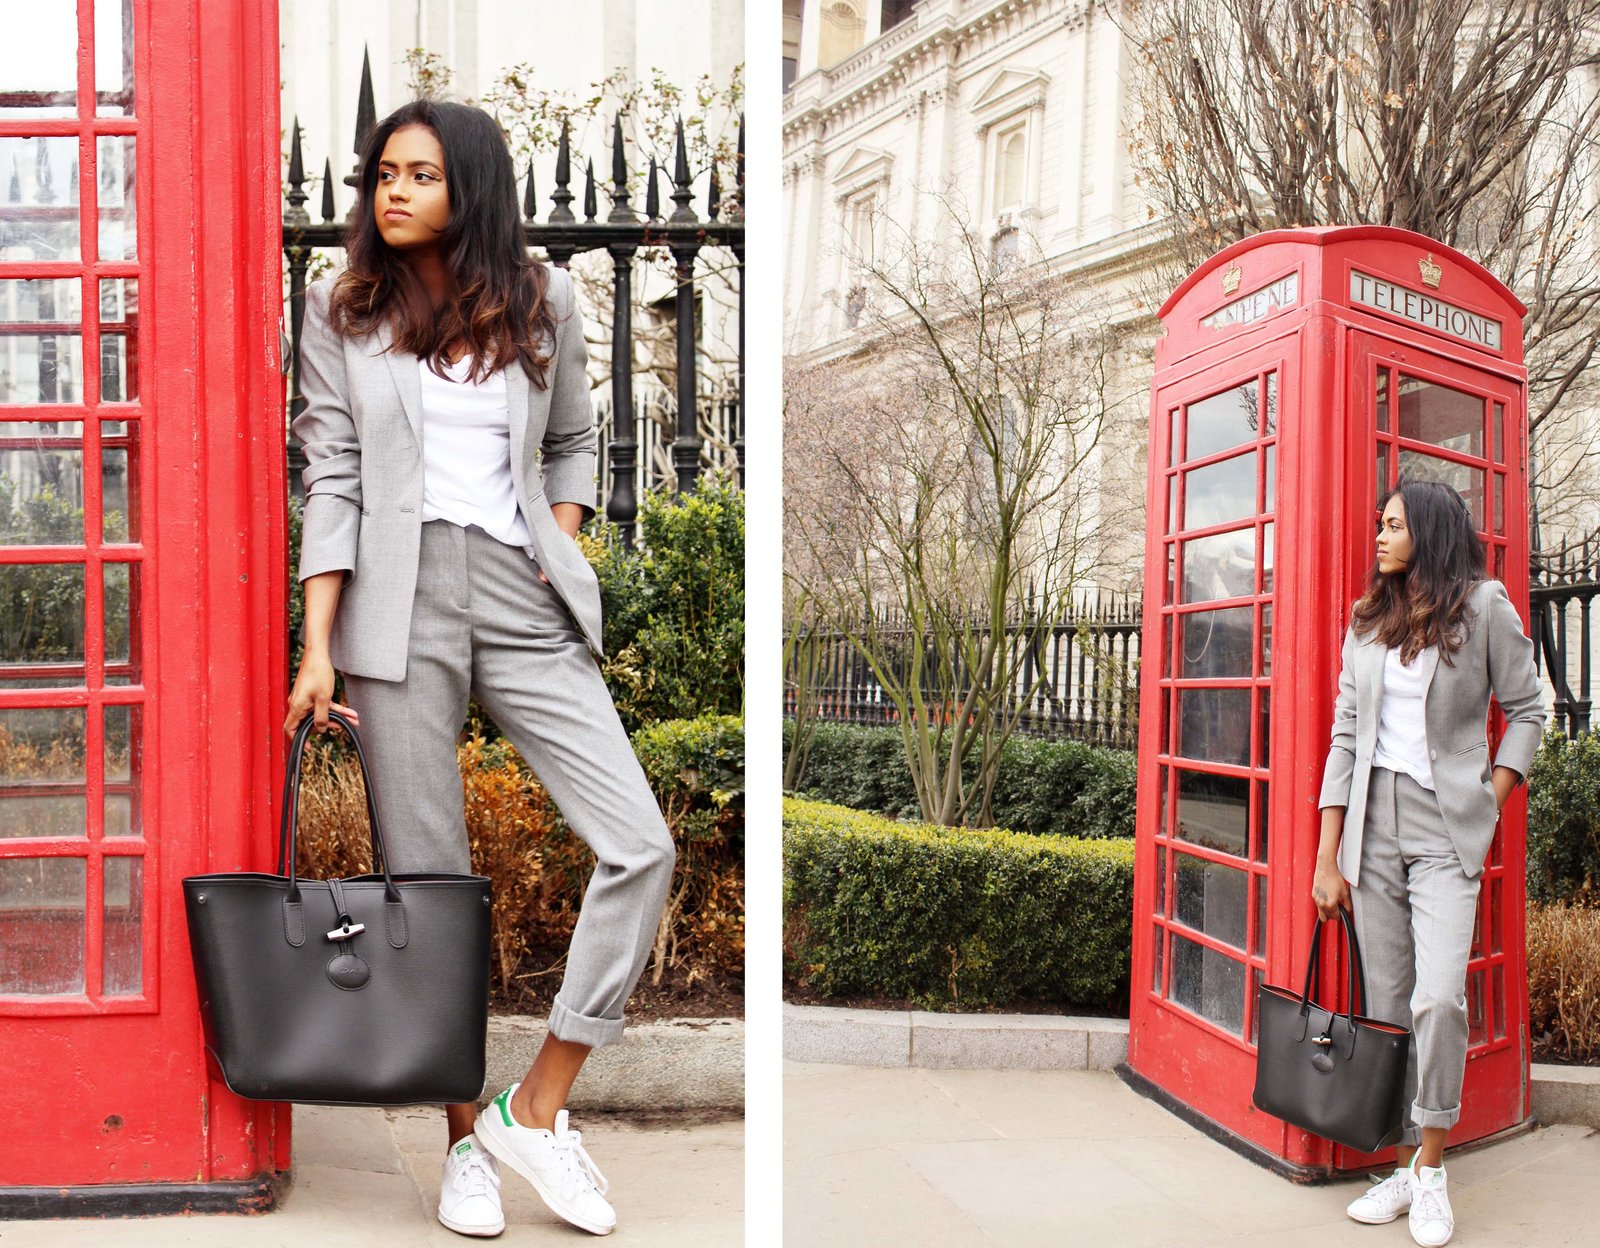 Two pictures of Sachini wearing a grey suit and white Adidas sneakers holding a black bag in front of a red phone booth next to St Paul